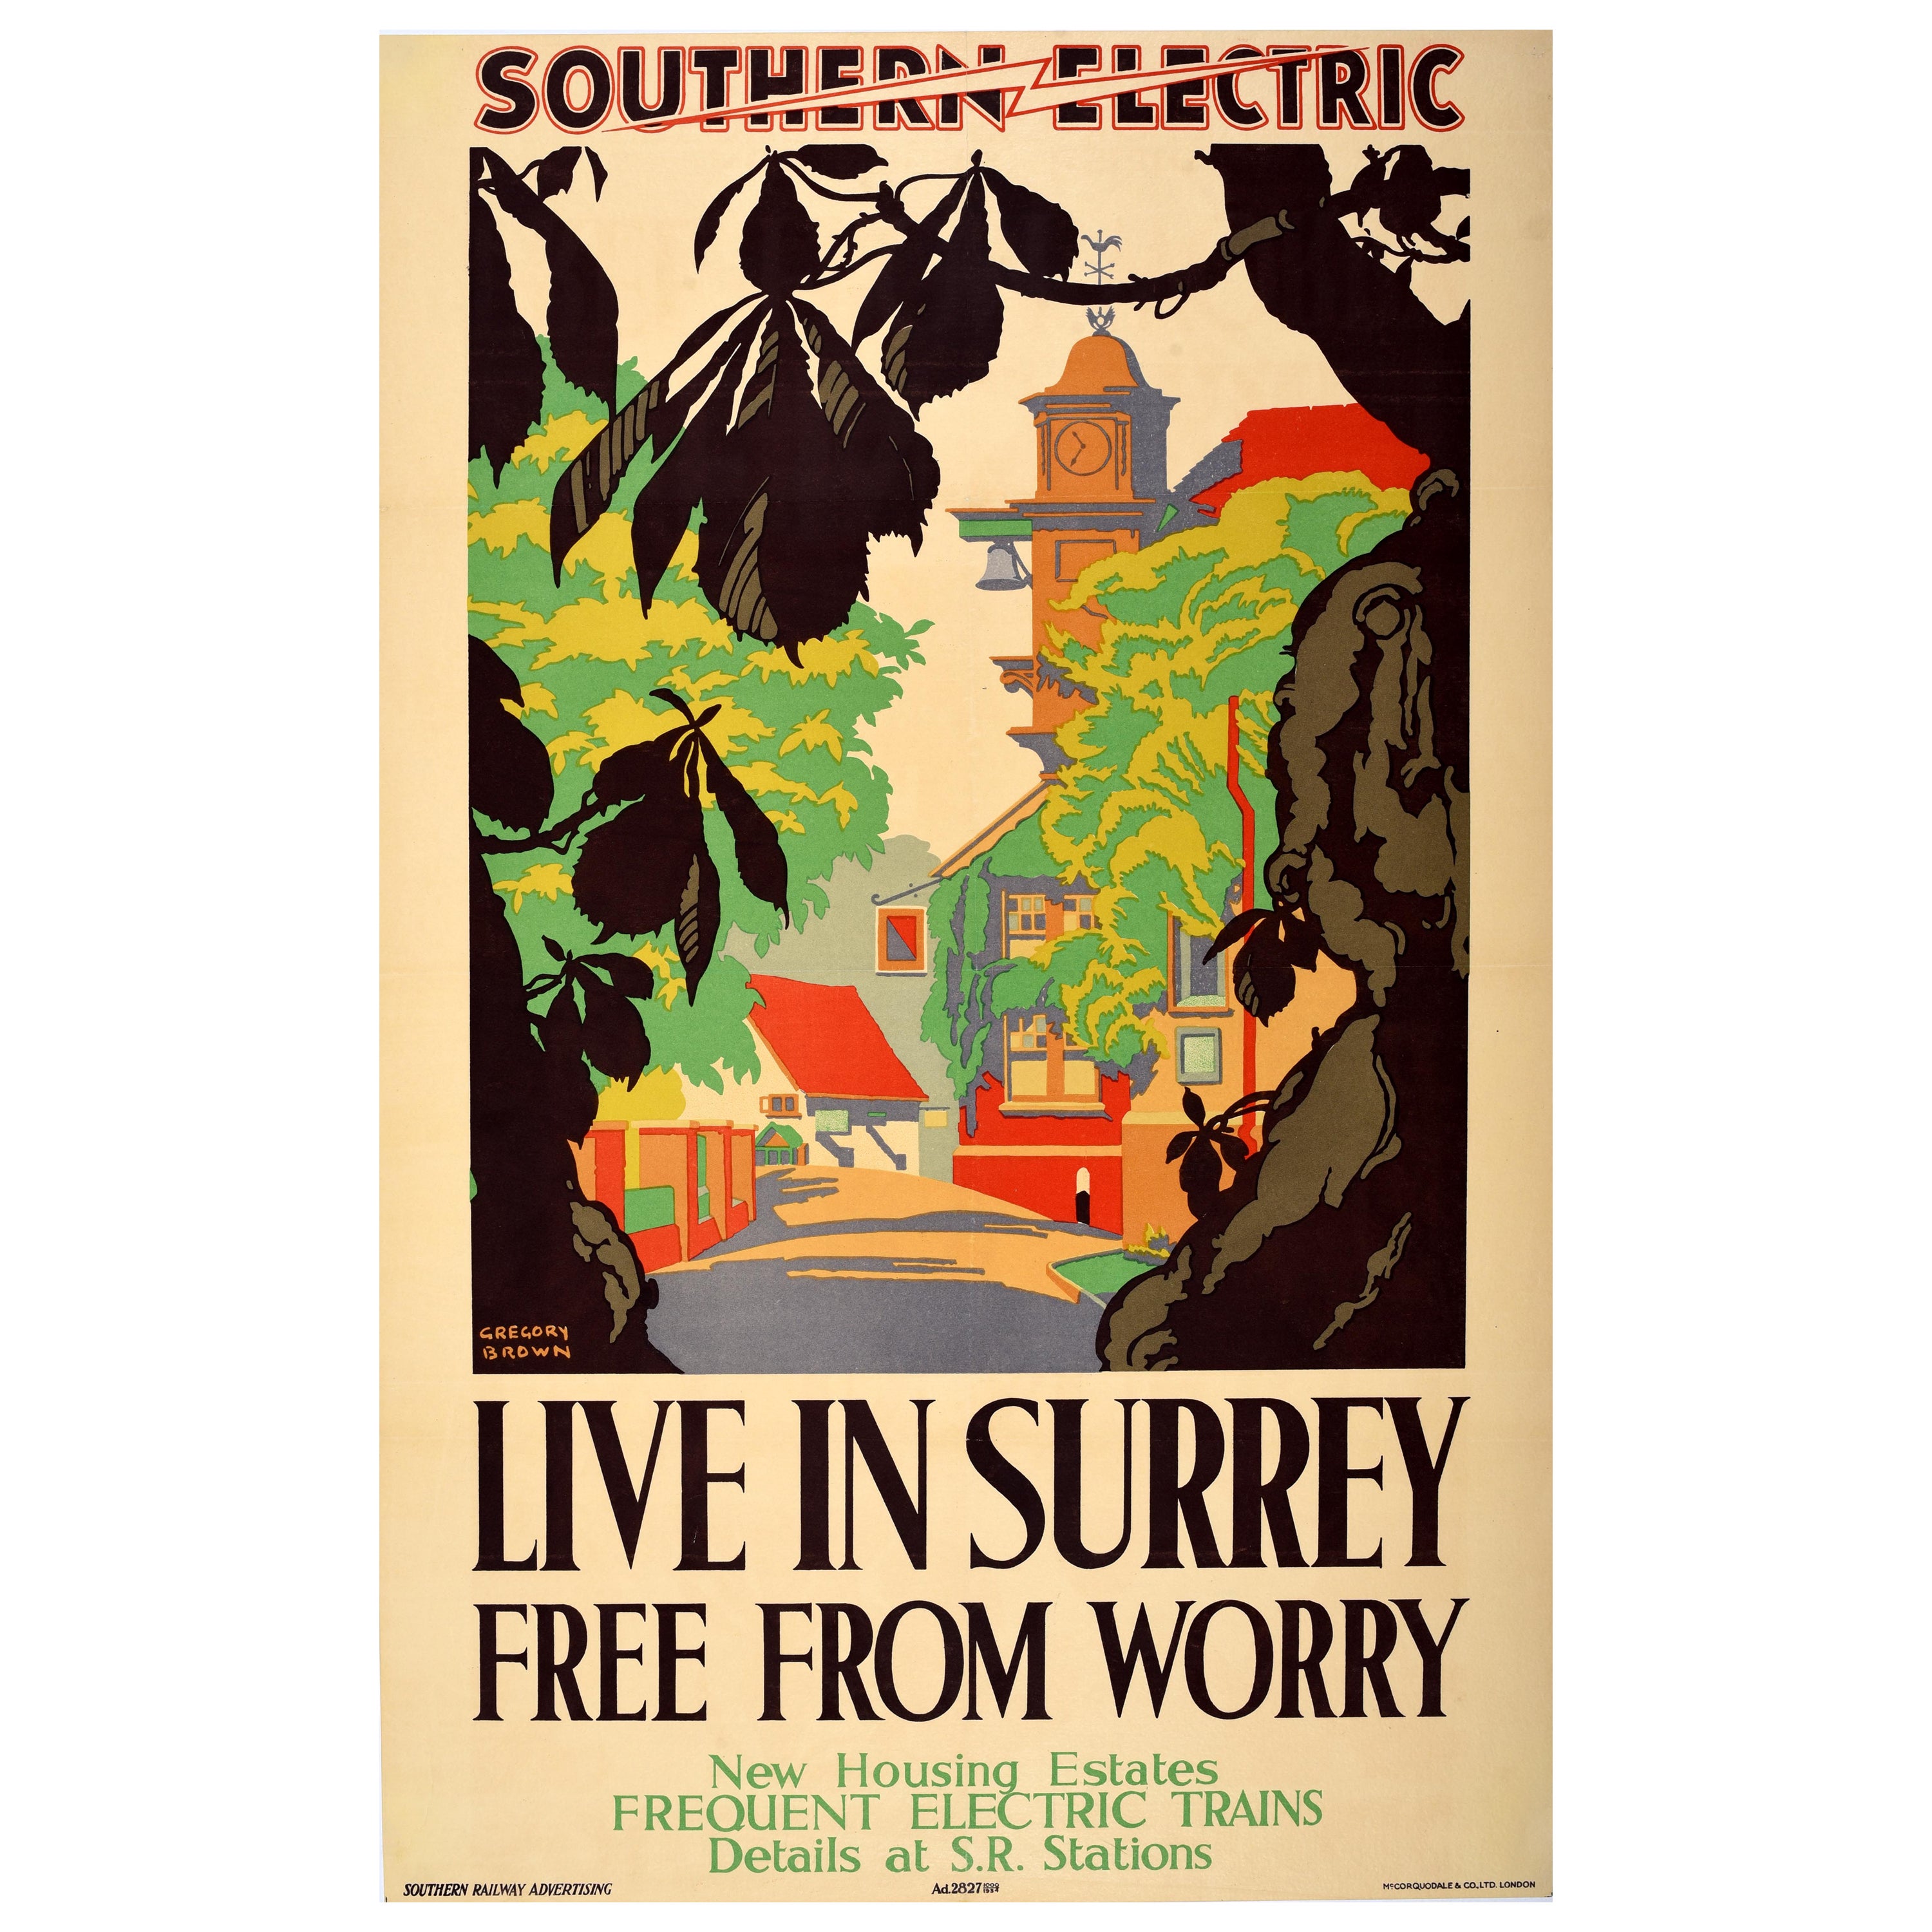 Original Vintage Travel Poster Live In Surrey Free From Worry Southern Electric For Sale